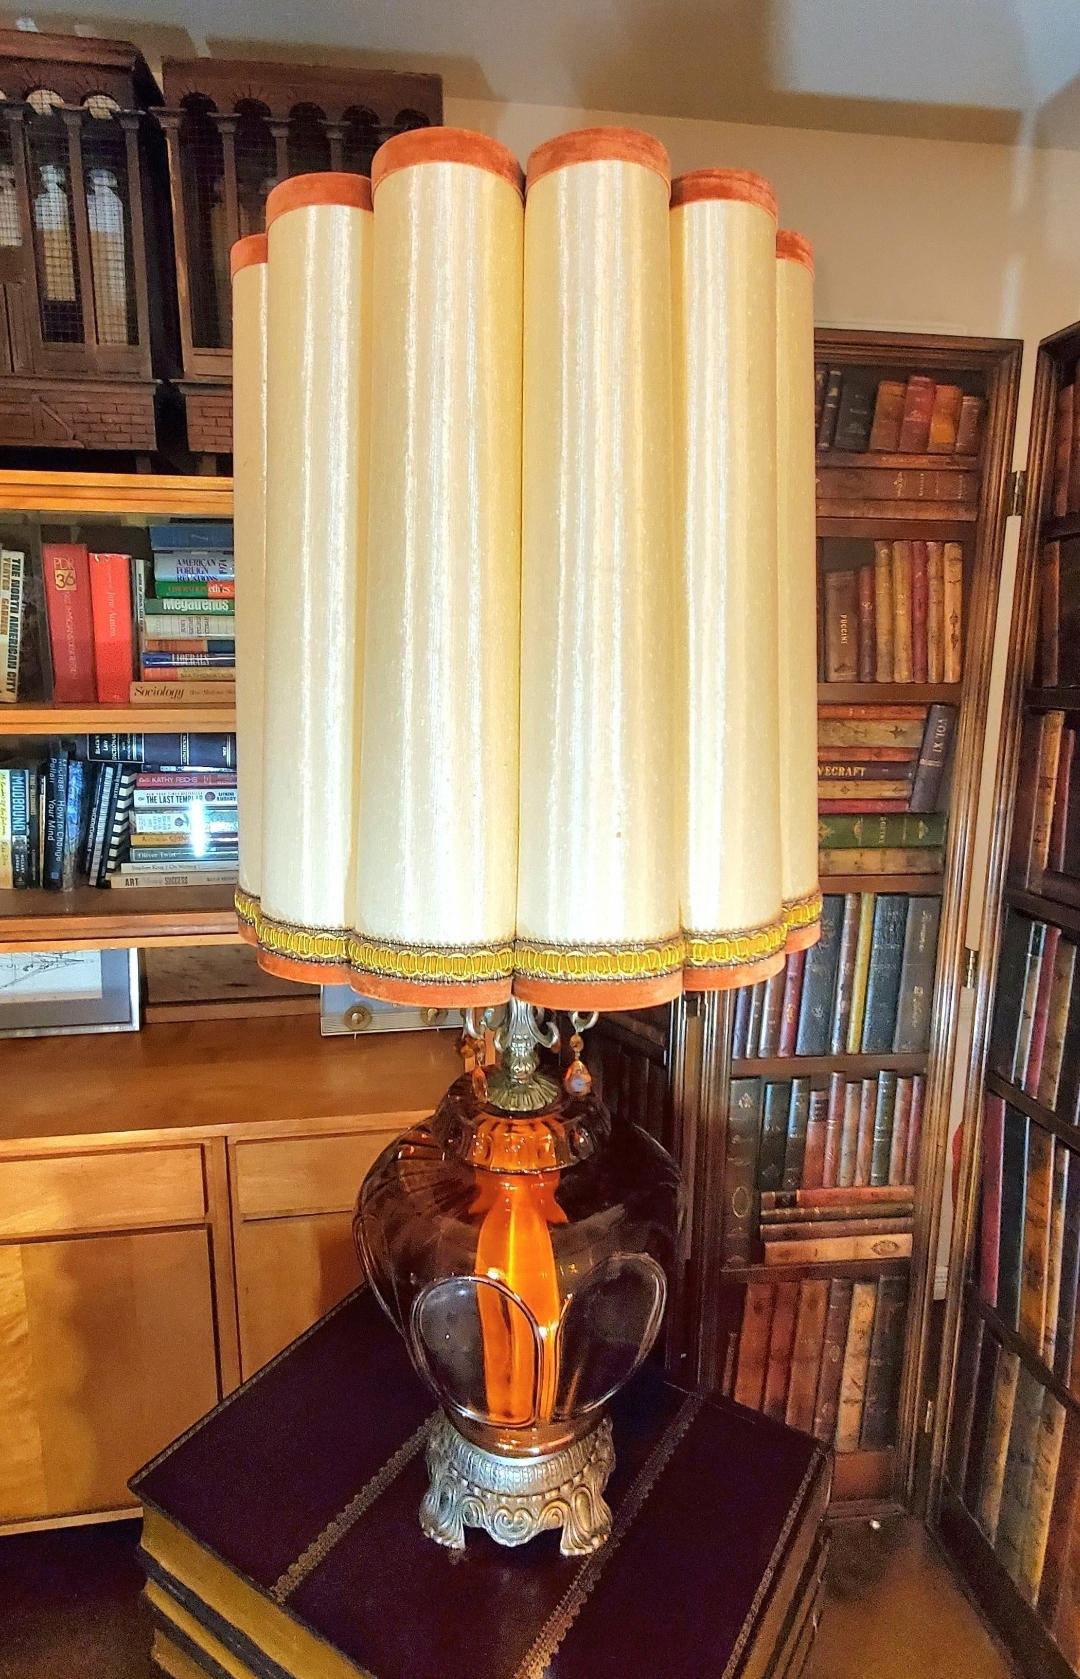 Monumental.
Massive amber glass Hollywood Regency table lamp.
Separate light inside amber glass.
Gorgeous fluted drum lamp shade.
Perfect functionality.
Art Deco.
Mid century modern.
35